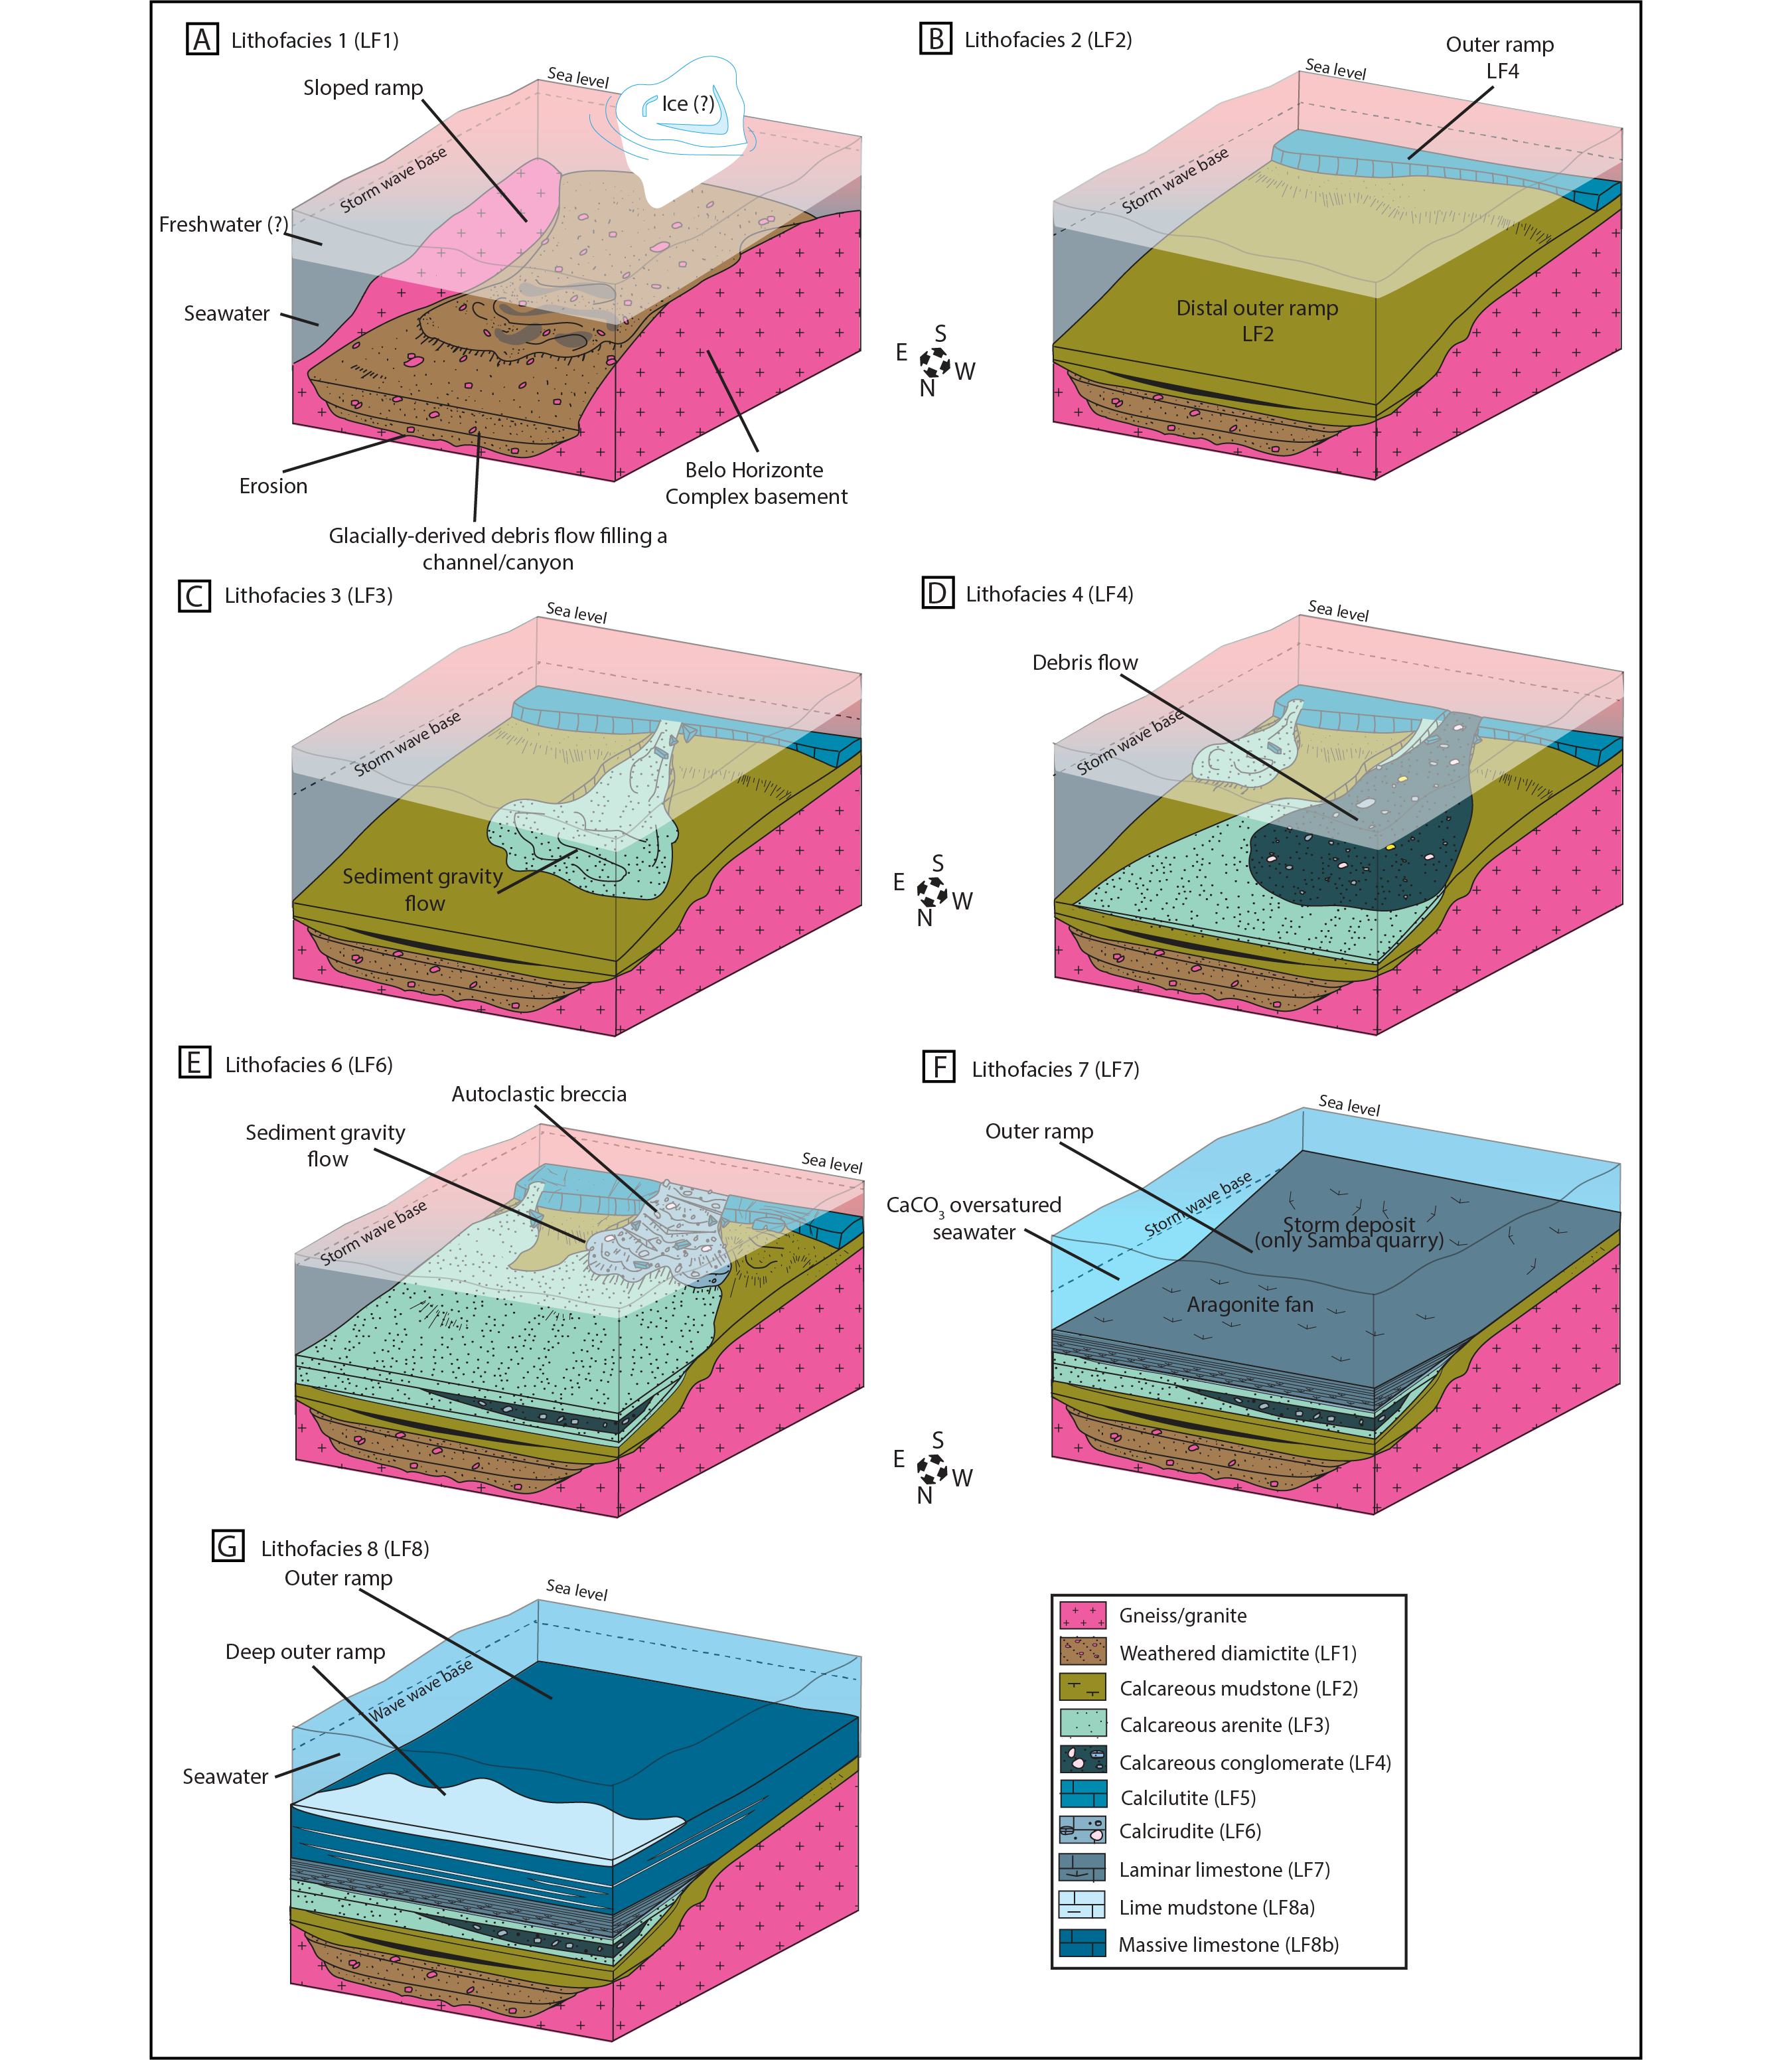 SIMPLE STRUCTURES AND COMPLEX STORIES: POTENTIAL MICROBIALLY INDUCED  SEDIMENTARY STRUCTURES IN THE EDIACARAN SERRA DE SANTA HELENA FORMATION,  BAMBUÍ GROUP, EASTERN BRAZIL